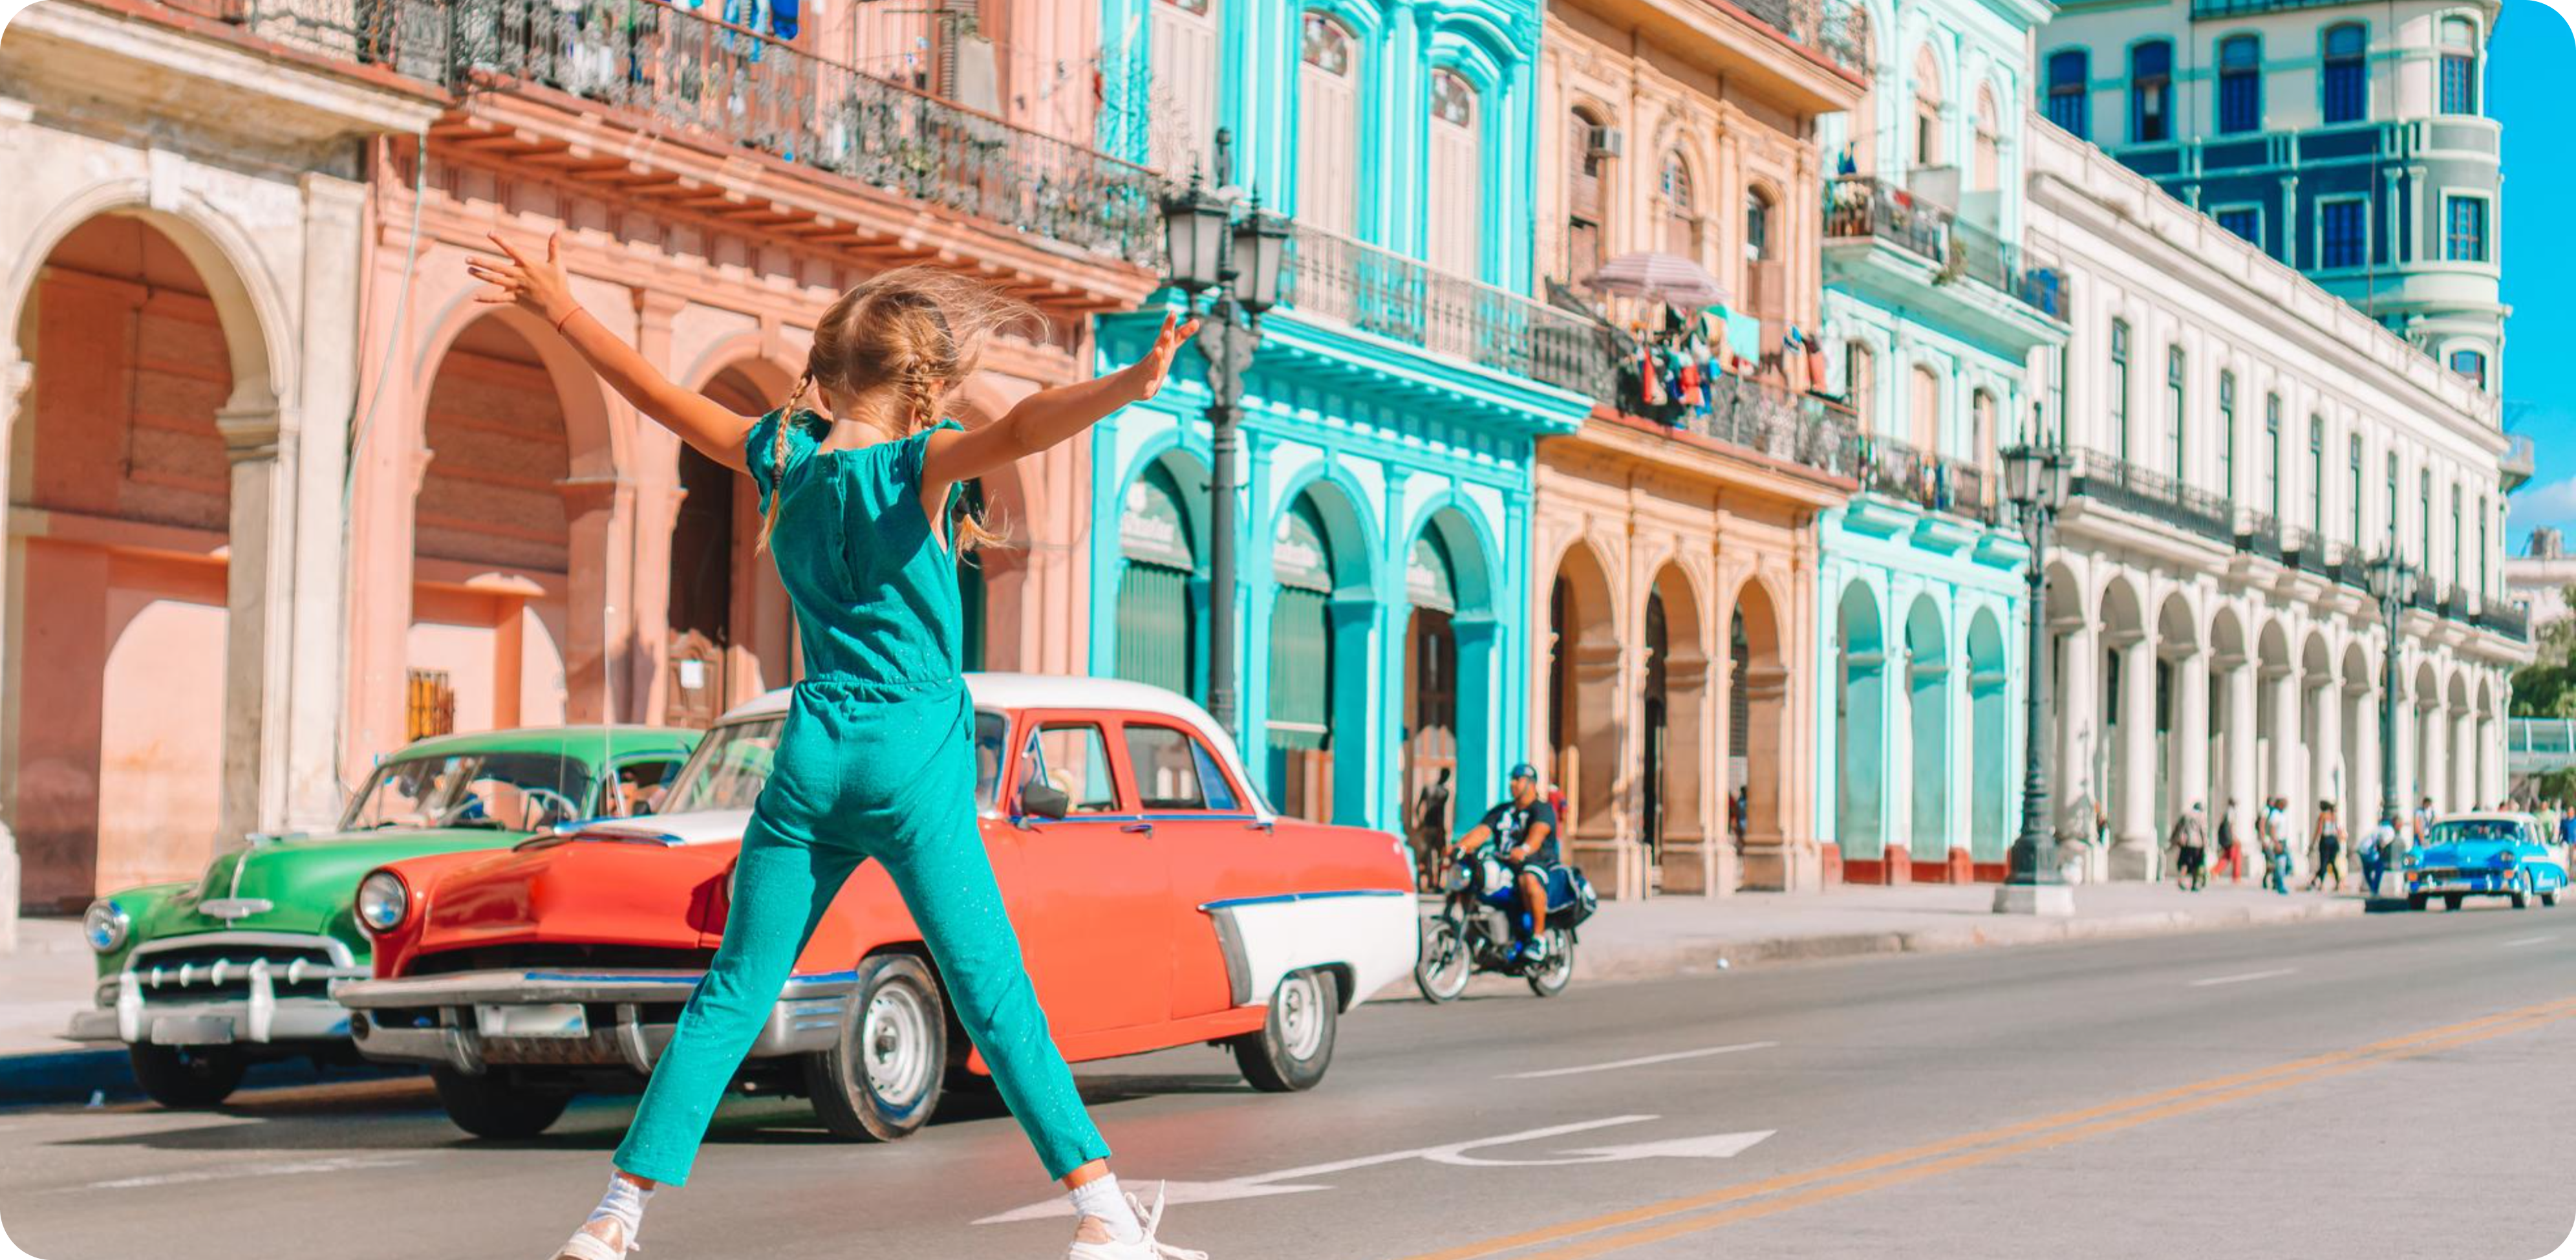 A blonde little girl playing in the streets with colorful buildings